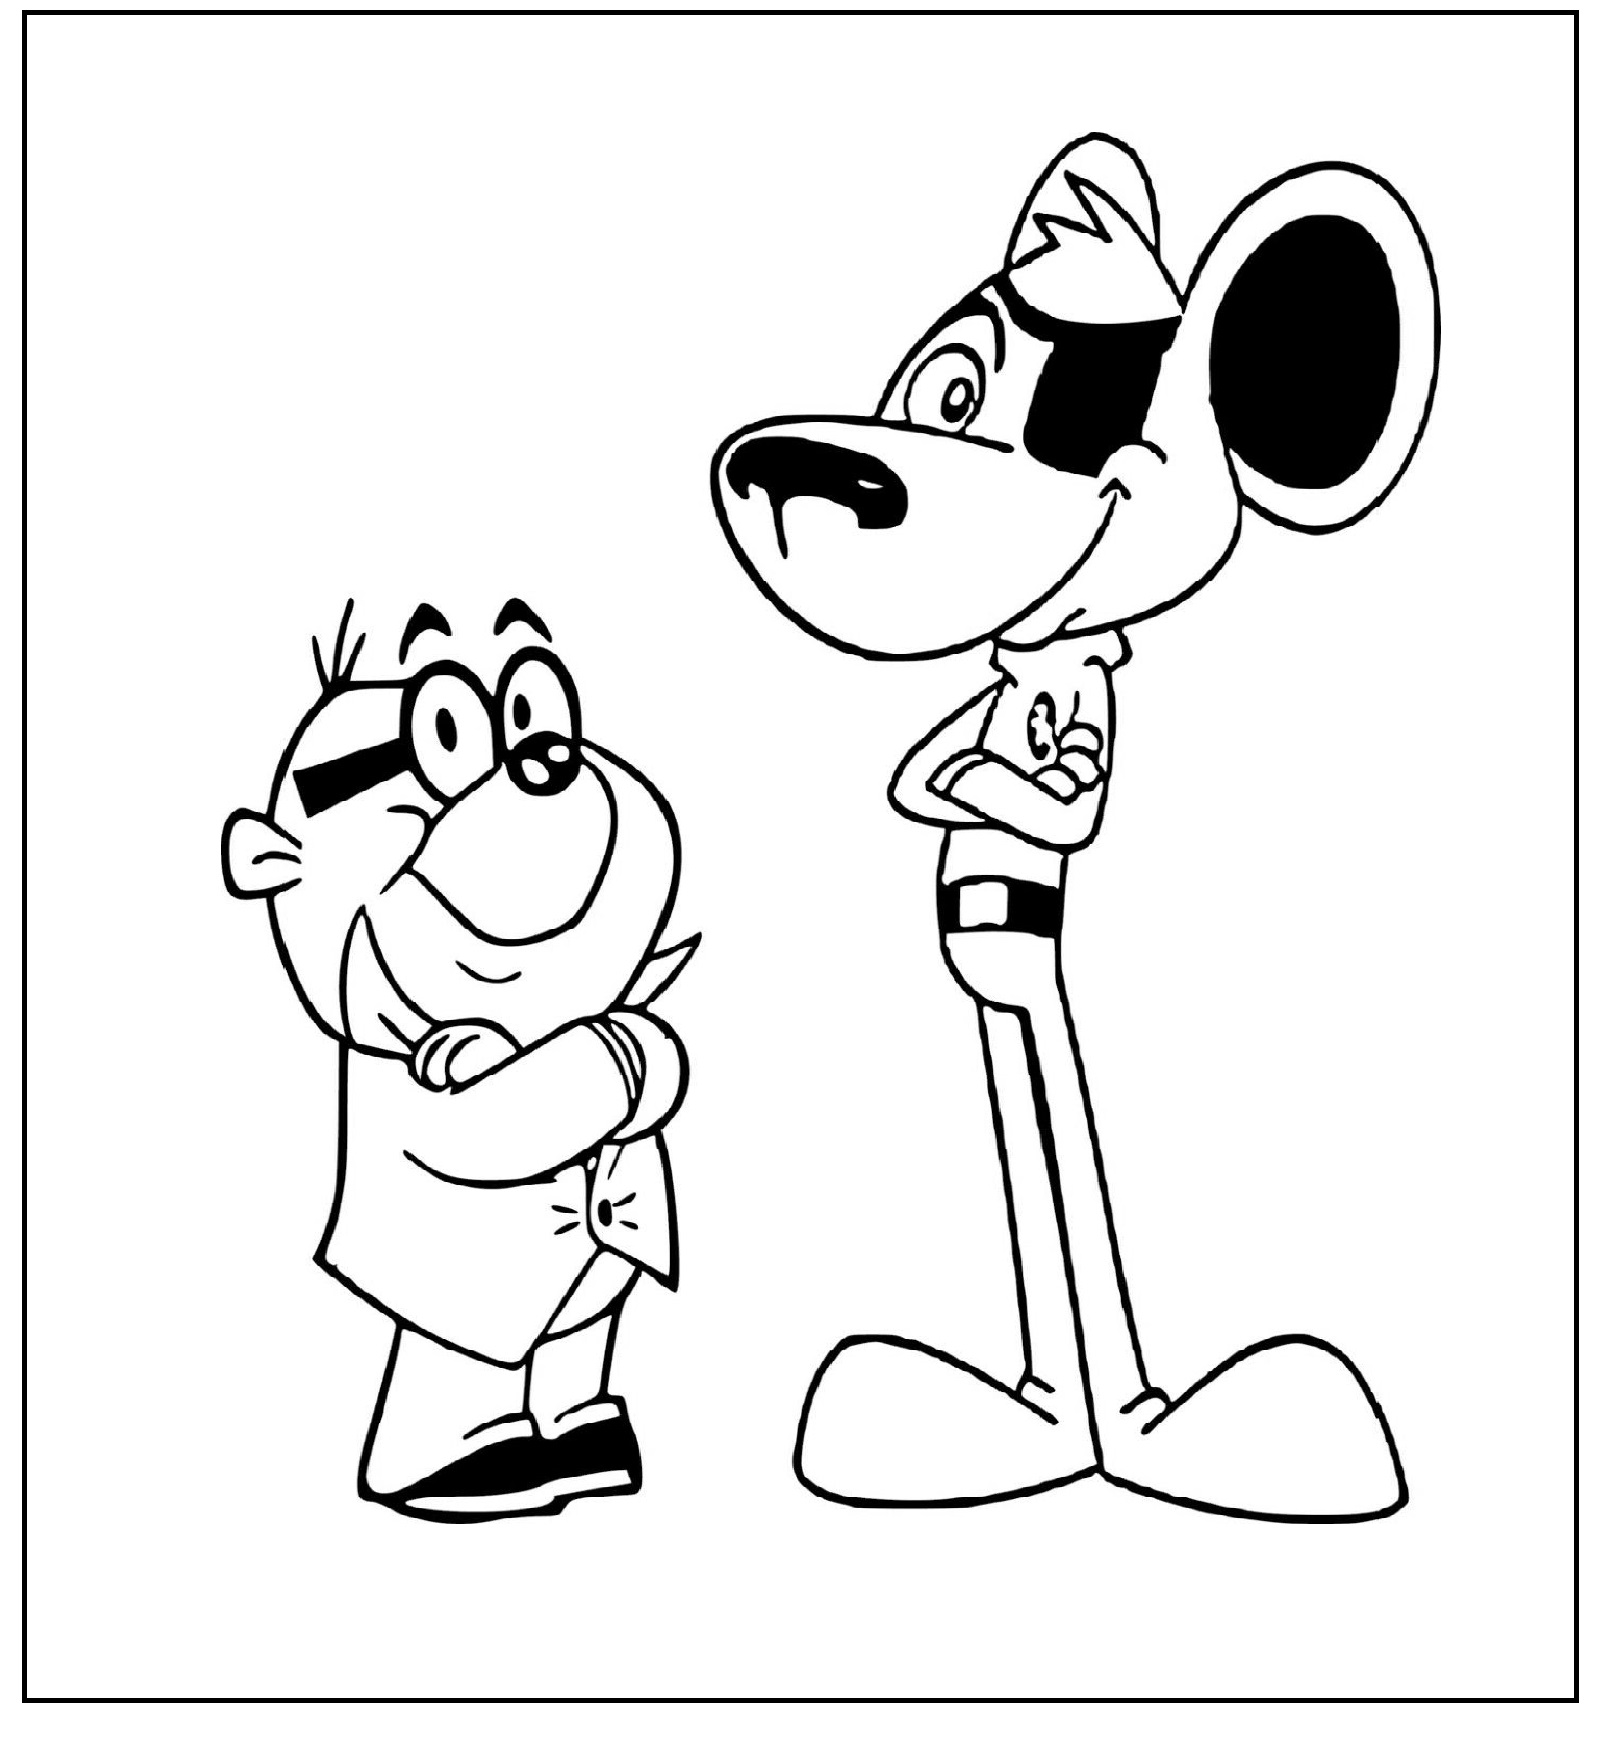 Printable Danger Mouse   7 Coloring Page for kids.